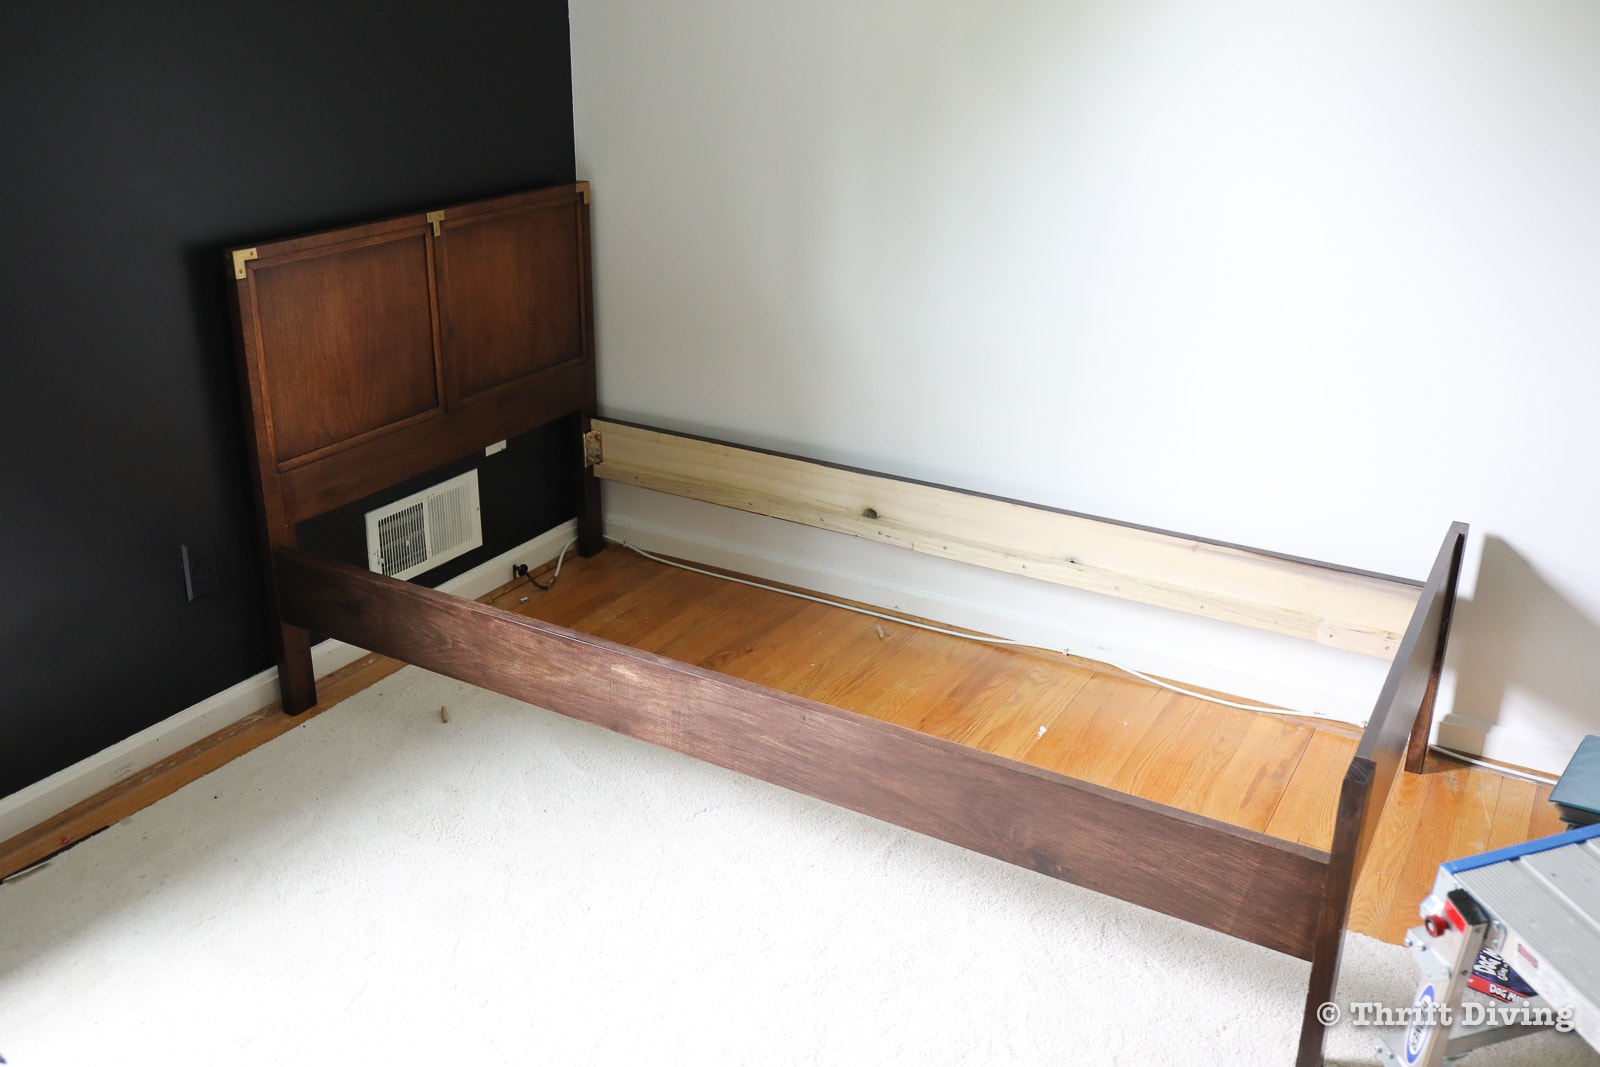 How to Build a Bed Using Vintage Headboards From the Thrift Store - Attach the bed rails to the headboard and footboard. - Thrift Diving